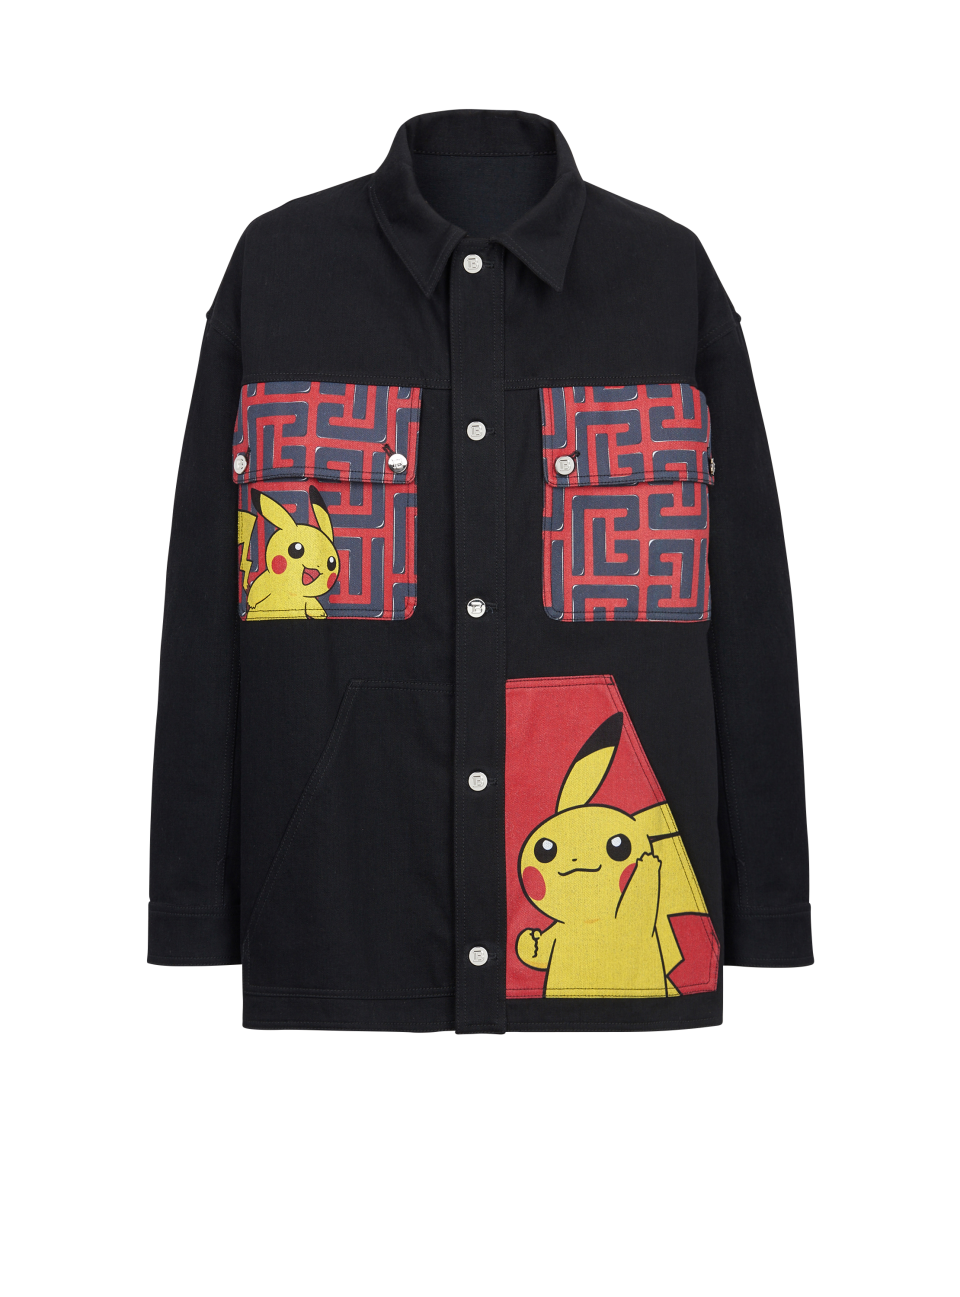 A jacket from the Balmain X Pokémon limited-edition collection.